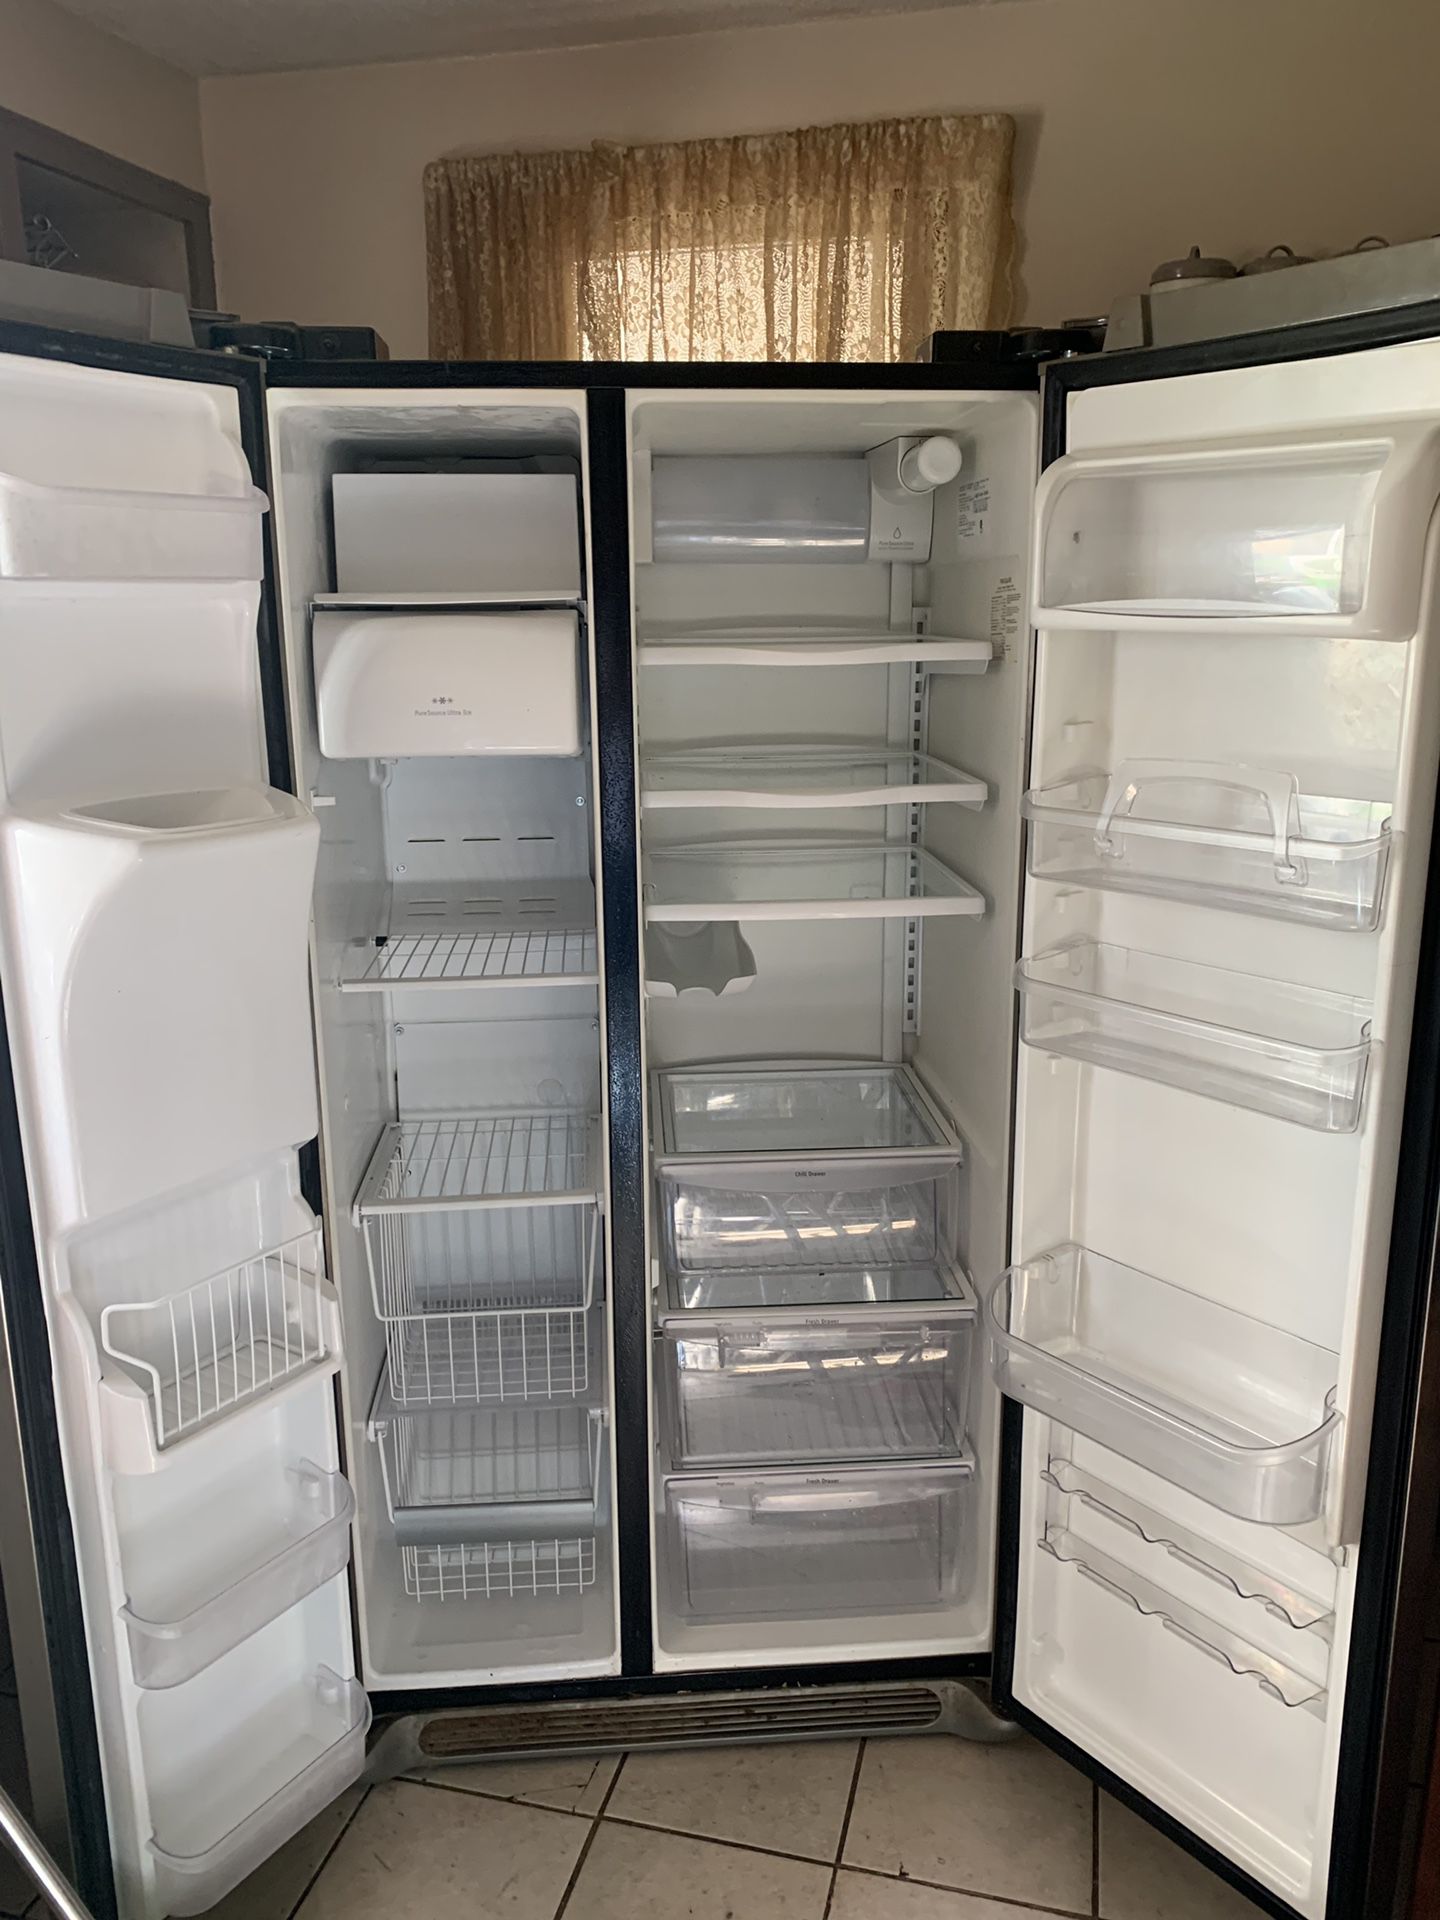 Frigidaire side by side refrigerator with ice maker